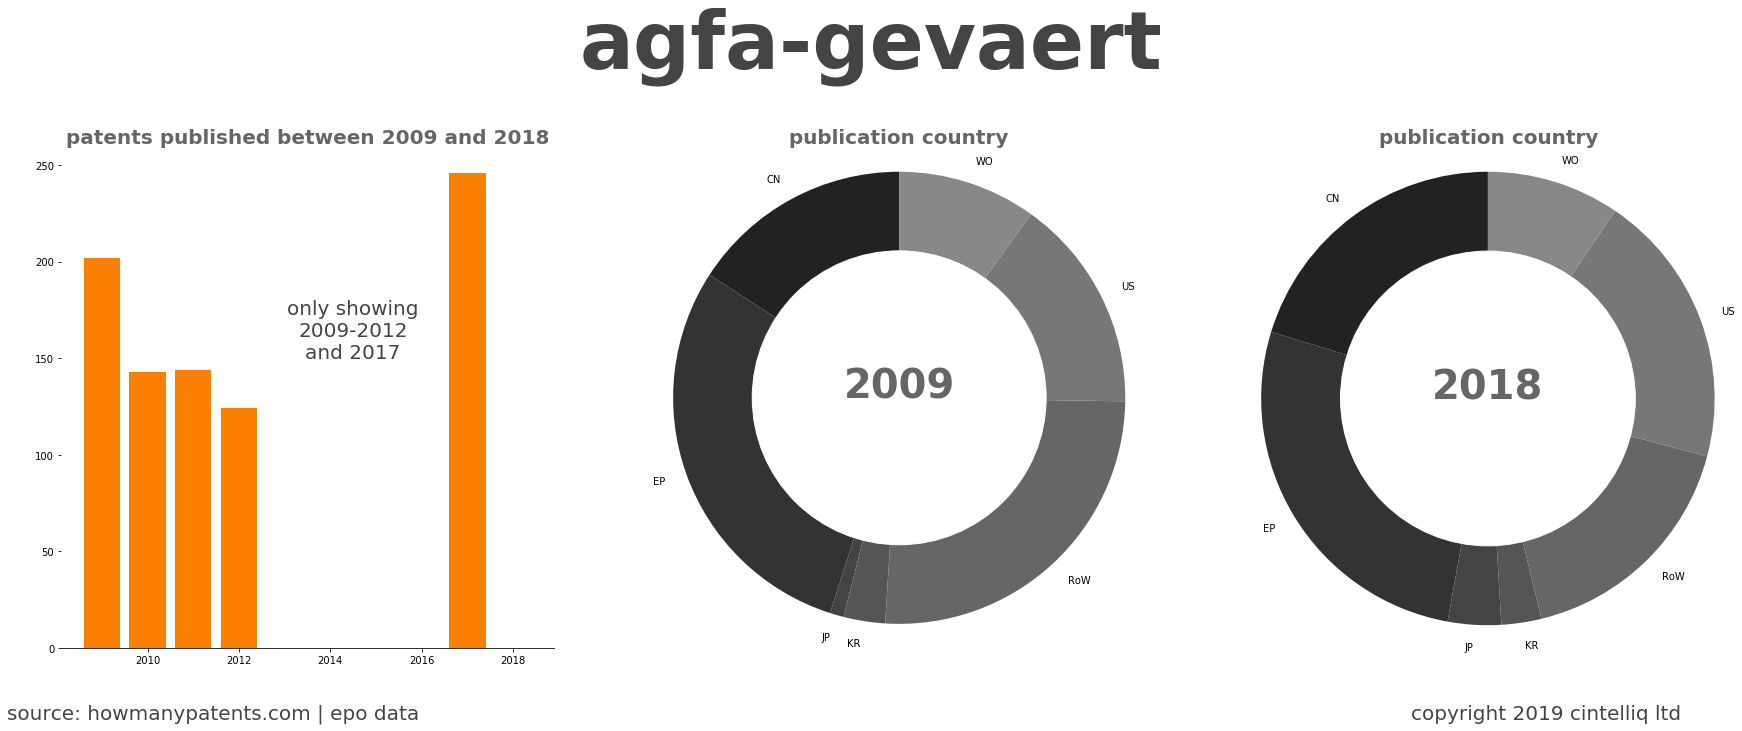 summary of patents for Agfa-Gevaert